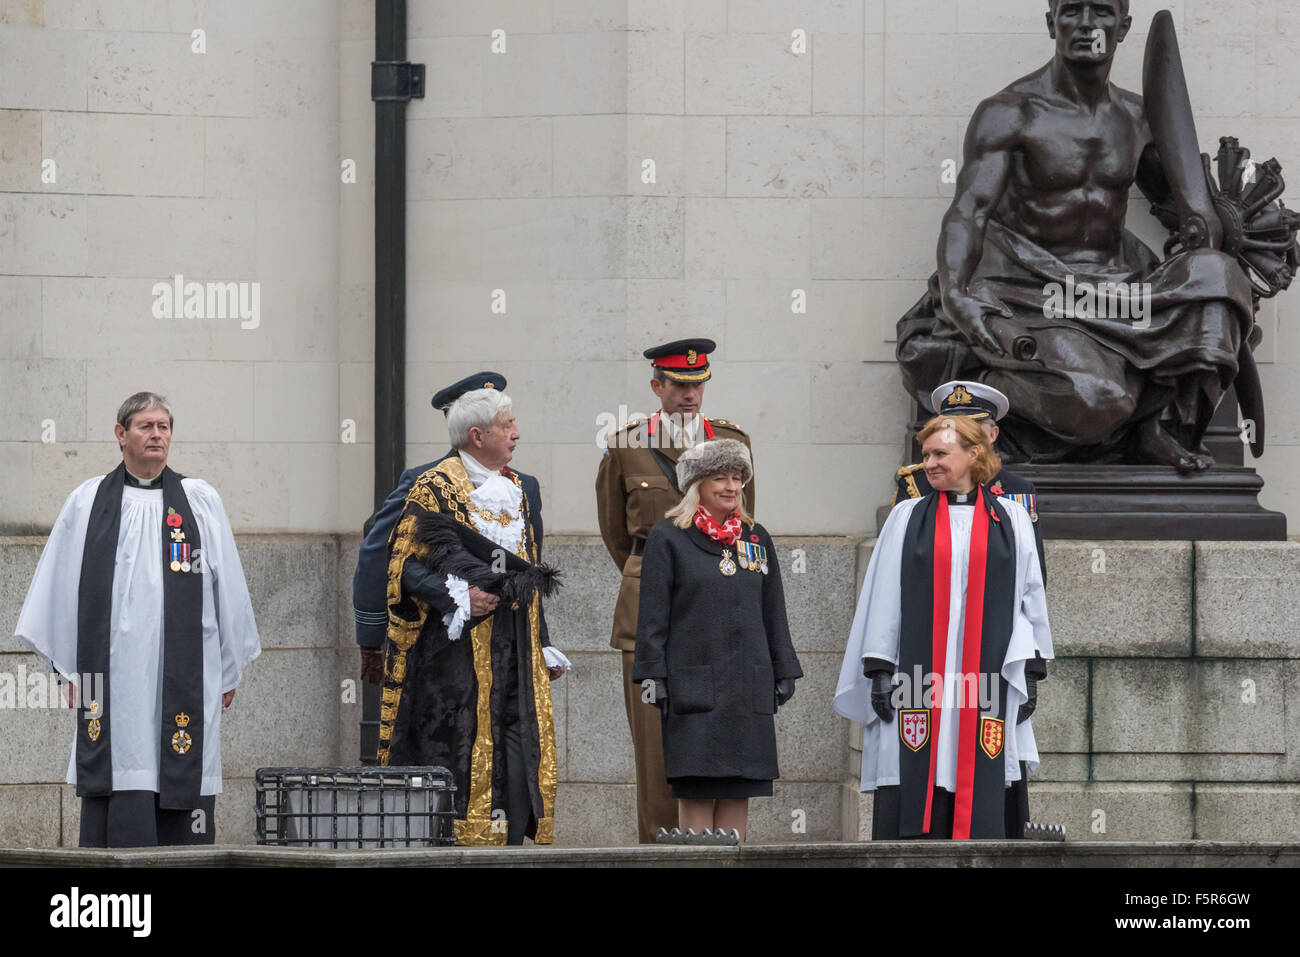 Birmingham, UK. 8th November, 2015. The Lord Mayor of Birmingham Councillor Raymond Hassall, Chaplain The Reverend Victor Van Den Bergh and the Dean of Birmingham The Very Reverend Catherine Ogle at the Day Of National Remembrance Centenary Square Birmingham UK Credit:  David Holbrook/Alamy Live News Stock Photo